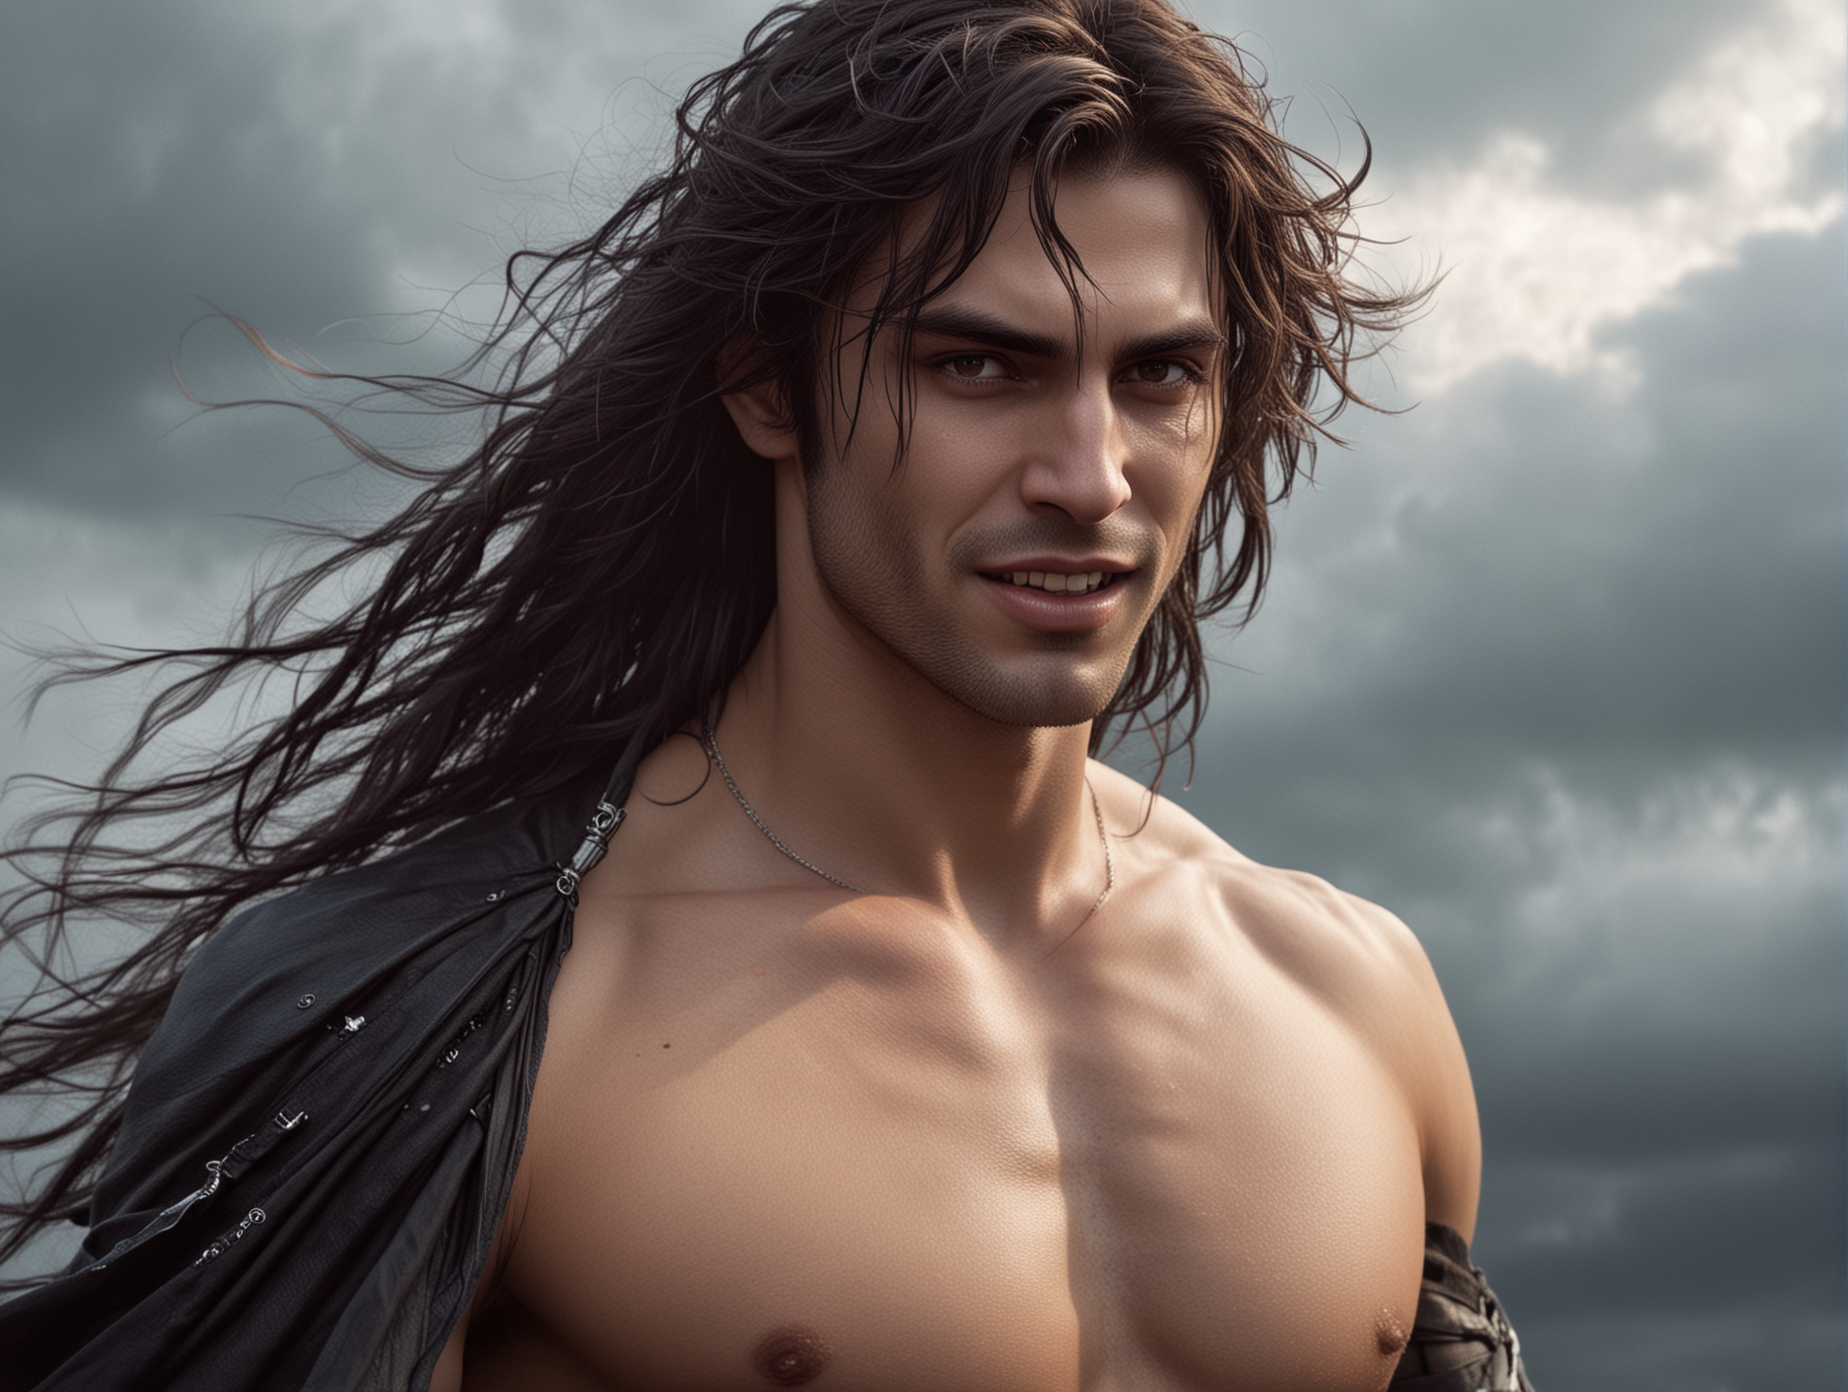 half naked warrior-vampire from the near future, his hair blowing in the wind and comforting smile with hand raised towards you